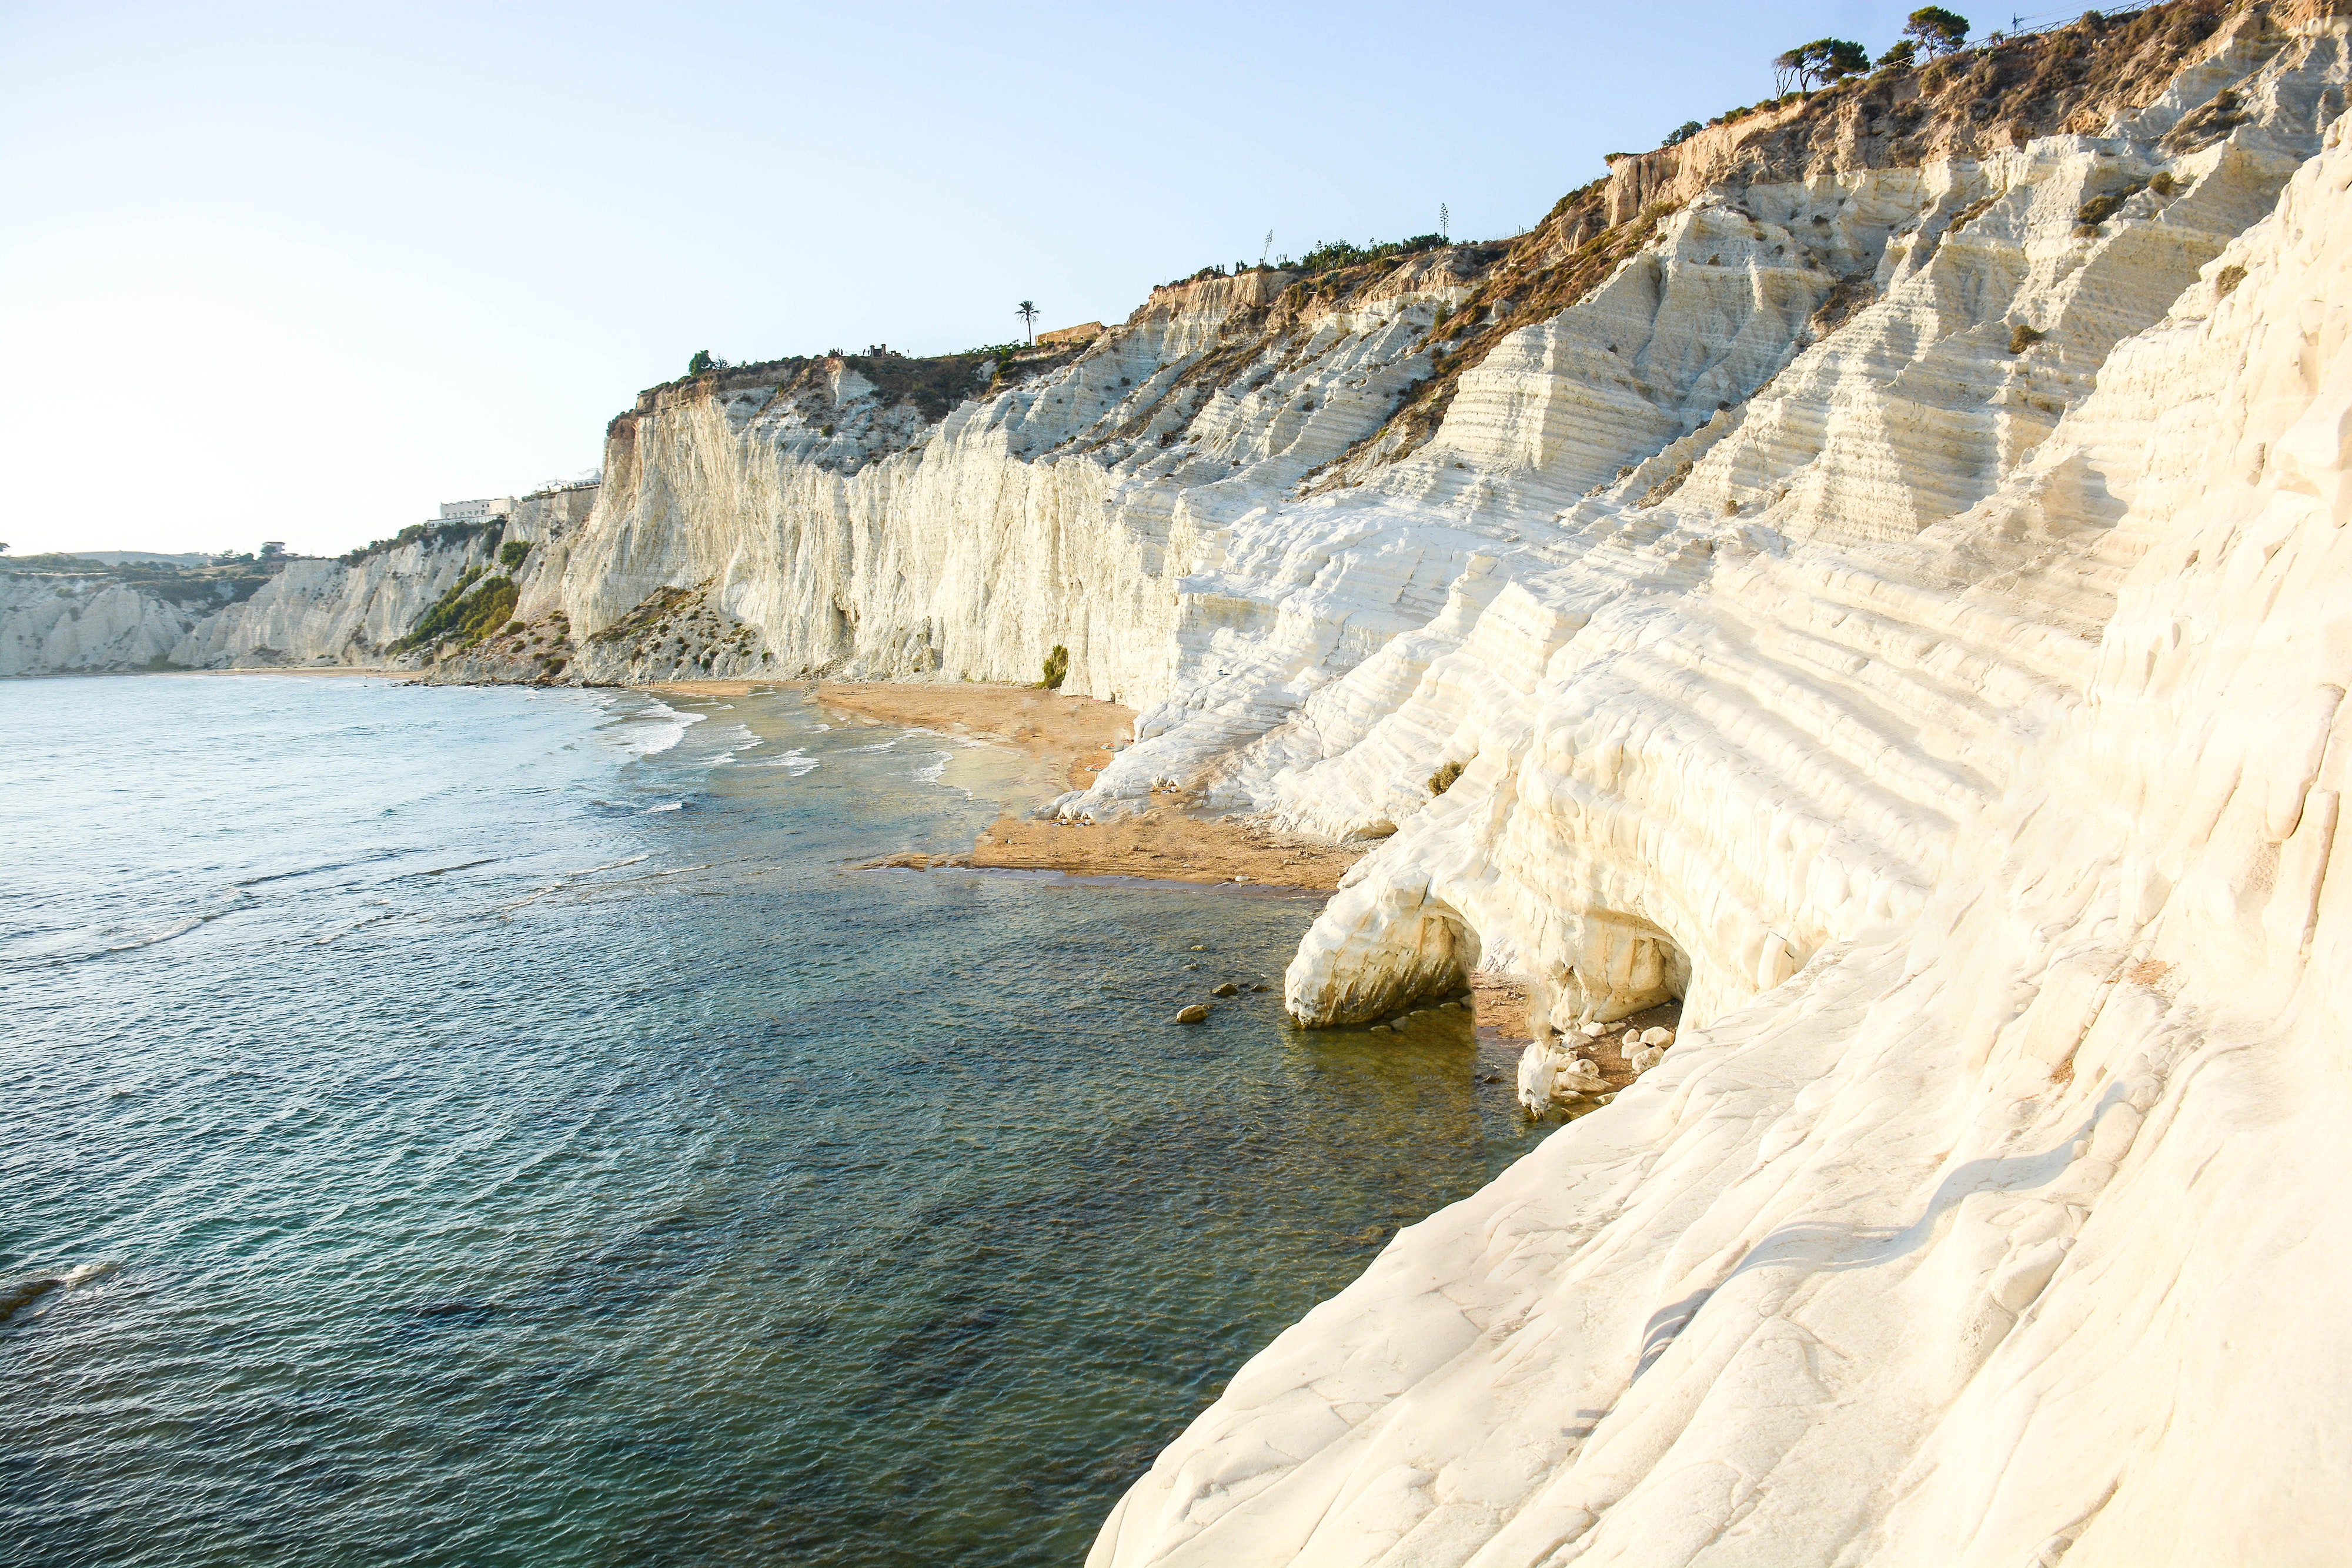 <p>The Scala dei Turchi—Italian for “Turkish Steps,” or more literally “Stairs of the Turks”—is a rocky cliff on the coast near the town of Realmonte on the southern edge of <a href="https://www.cntraveler.com/story/sicily-italy-itinerary?mbid=synd_msn_rss&utm_source=msn&utm_medium=syndication">Sicily</a>. The name dates back to the Middle Ages, when Ottoman corsairs sheltered themselves here from the fierce sea winds behind the crags made of characteristically white marlstone. At the base of the Scala sits a beach that is striking in its uniqueness, with fiery bronze sands offering a gorgeous contrast against the azure ocean and the pale cliffs.</p> <p>The area is about a two-hour drive from the city of Palermo (stay at the gorgeous <a href="https://www.cntraveler.com/hotels/palermo/villa-igiea-a-rocco-forte-hotel?mbid=synd_msn_rss&utm_source=msn&utm_medium=syndication">Villa Igiea, a Rocco Forte Hotel</a>), but it’s a worthwhile trek, given that it’s one of the island’s most beautiful natural wonders.</p><p>Sign up to receive the latest news, expert tips, and inspiration on all things travel</p><a href="https://www.cntraveler.com/newsletter/the-daily?sourceCode=msnsend">Inspire Me</a>